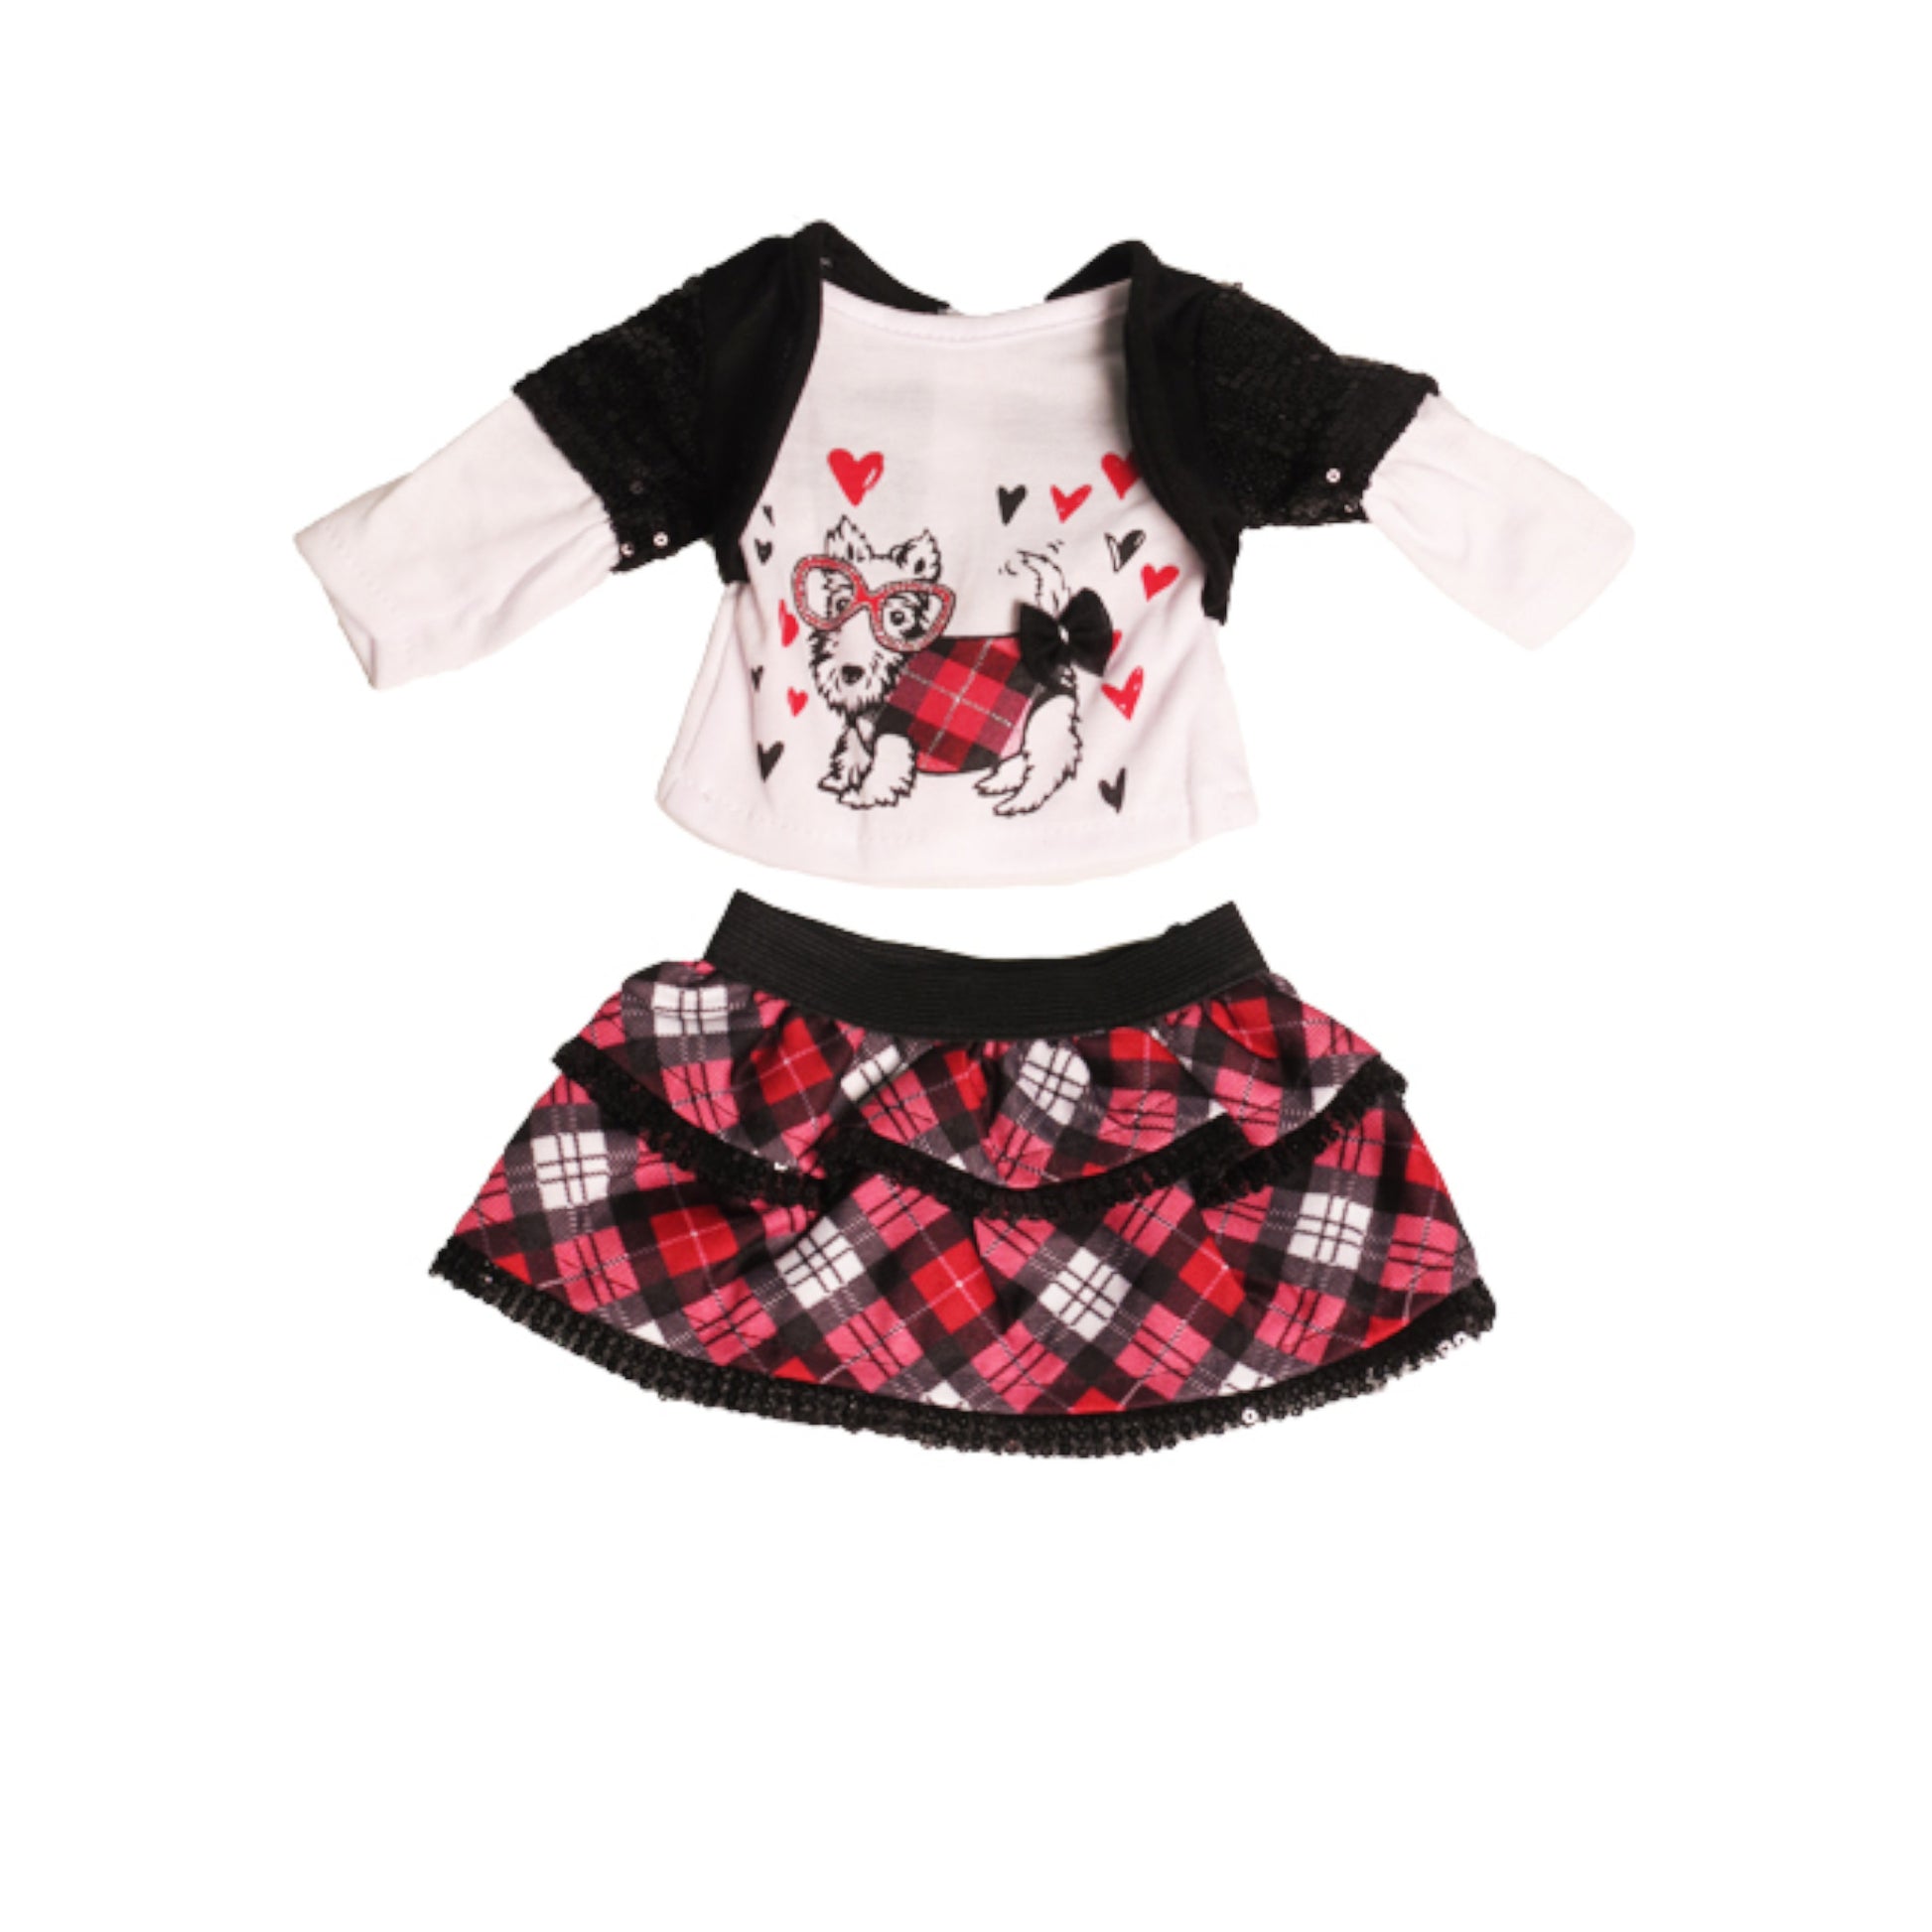 Plaid Glamour Puppy Outfit for 18-inch dolls Flat